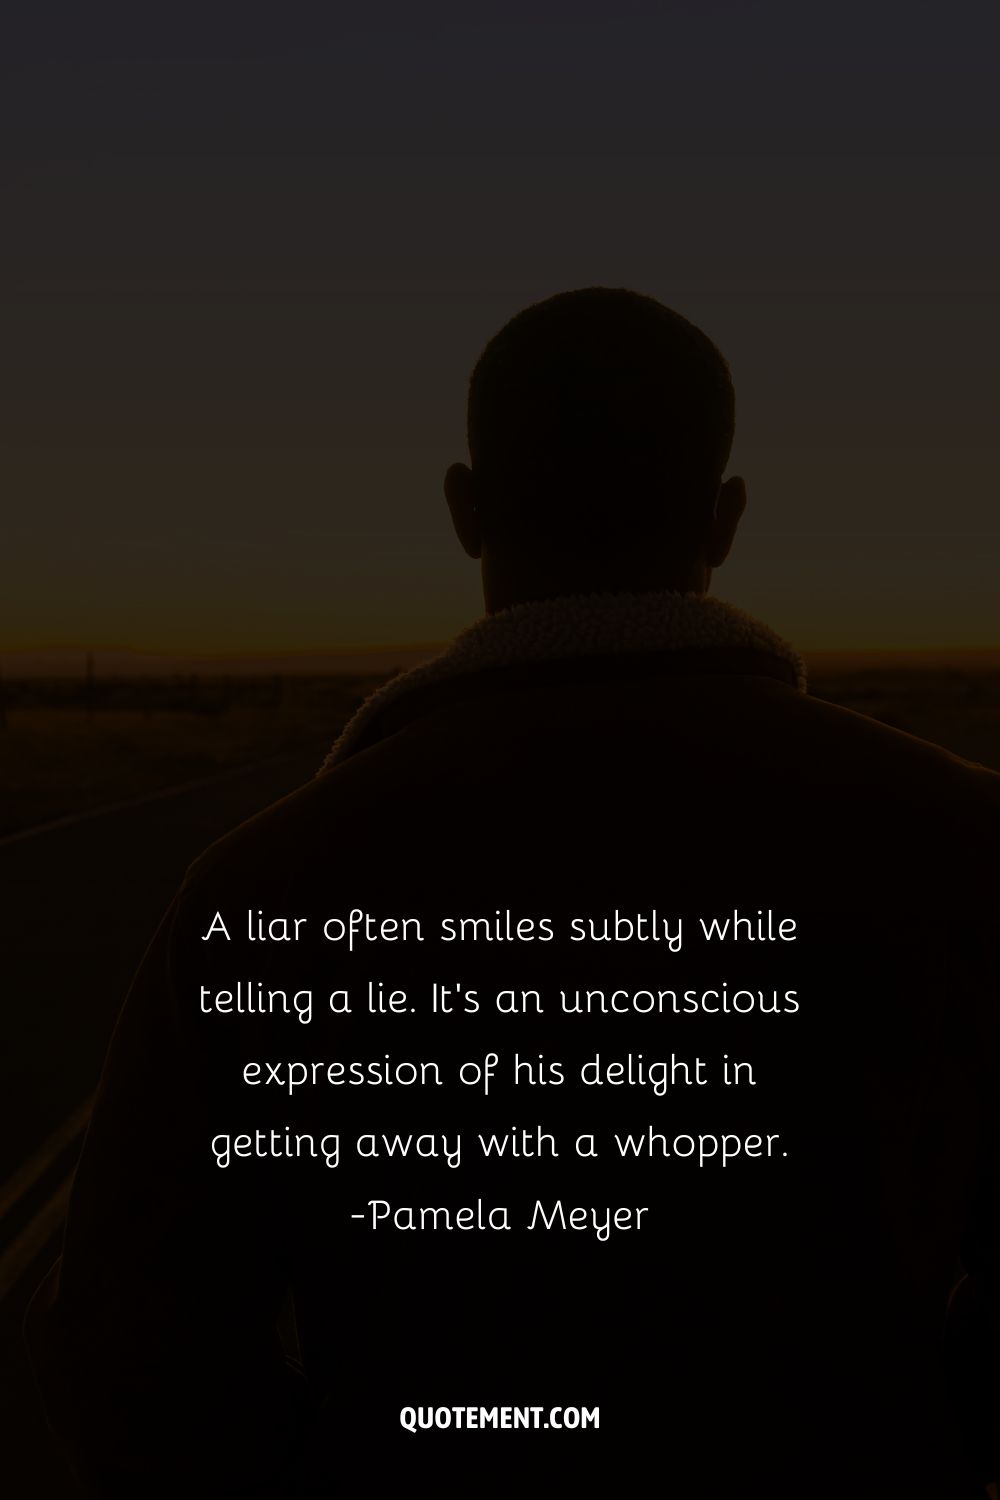 guy in dark image representing dealing with lies quote
